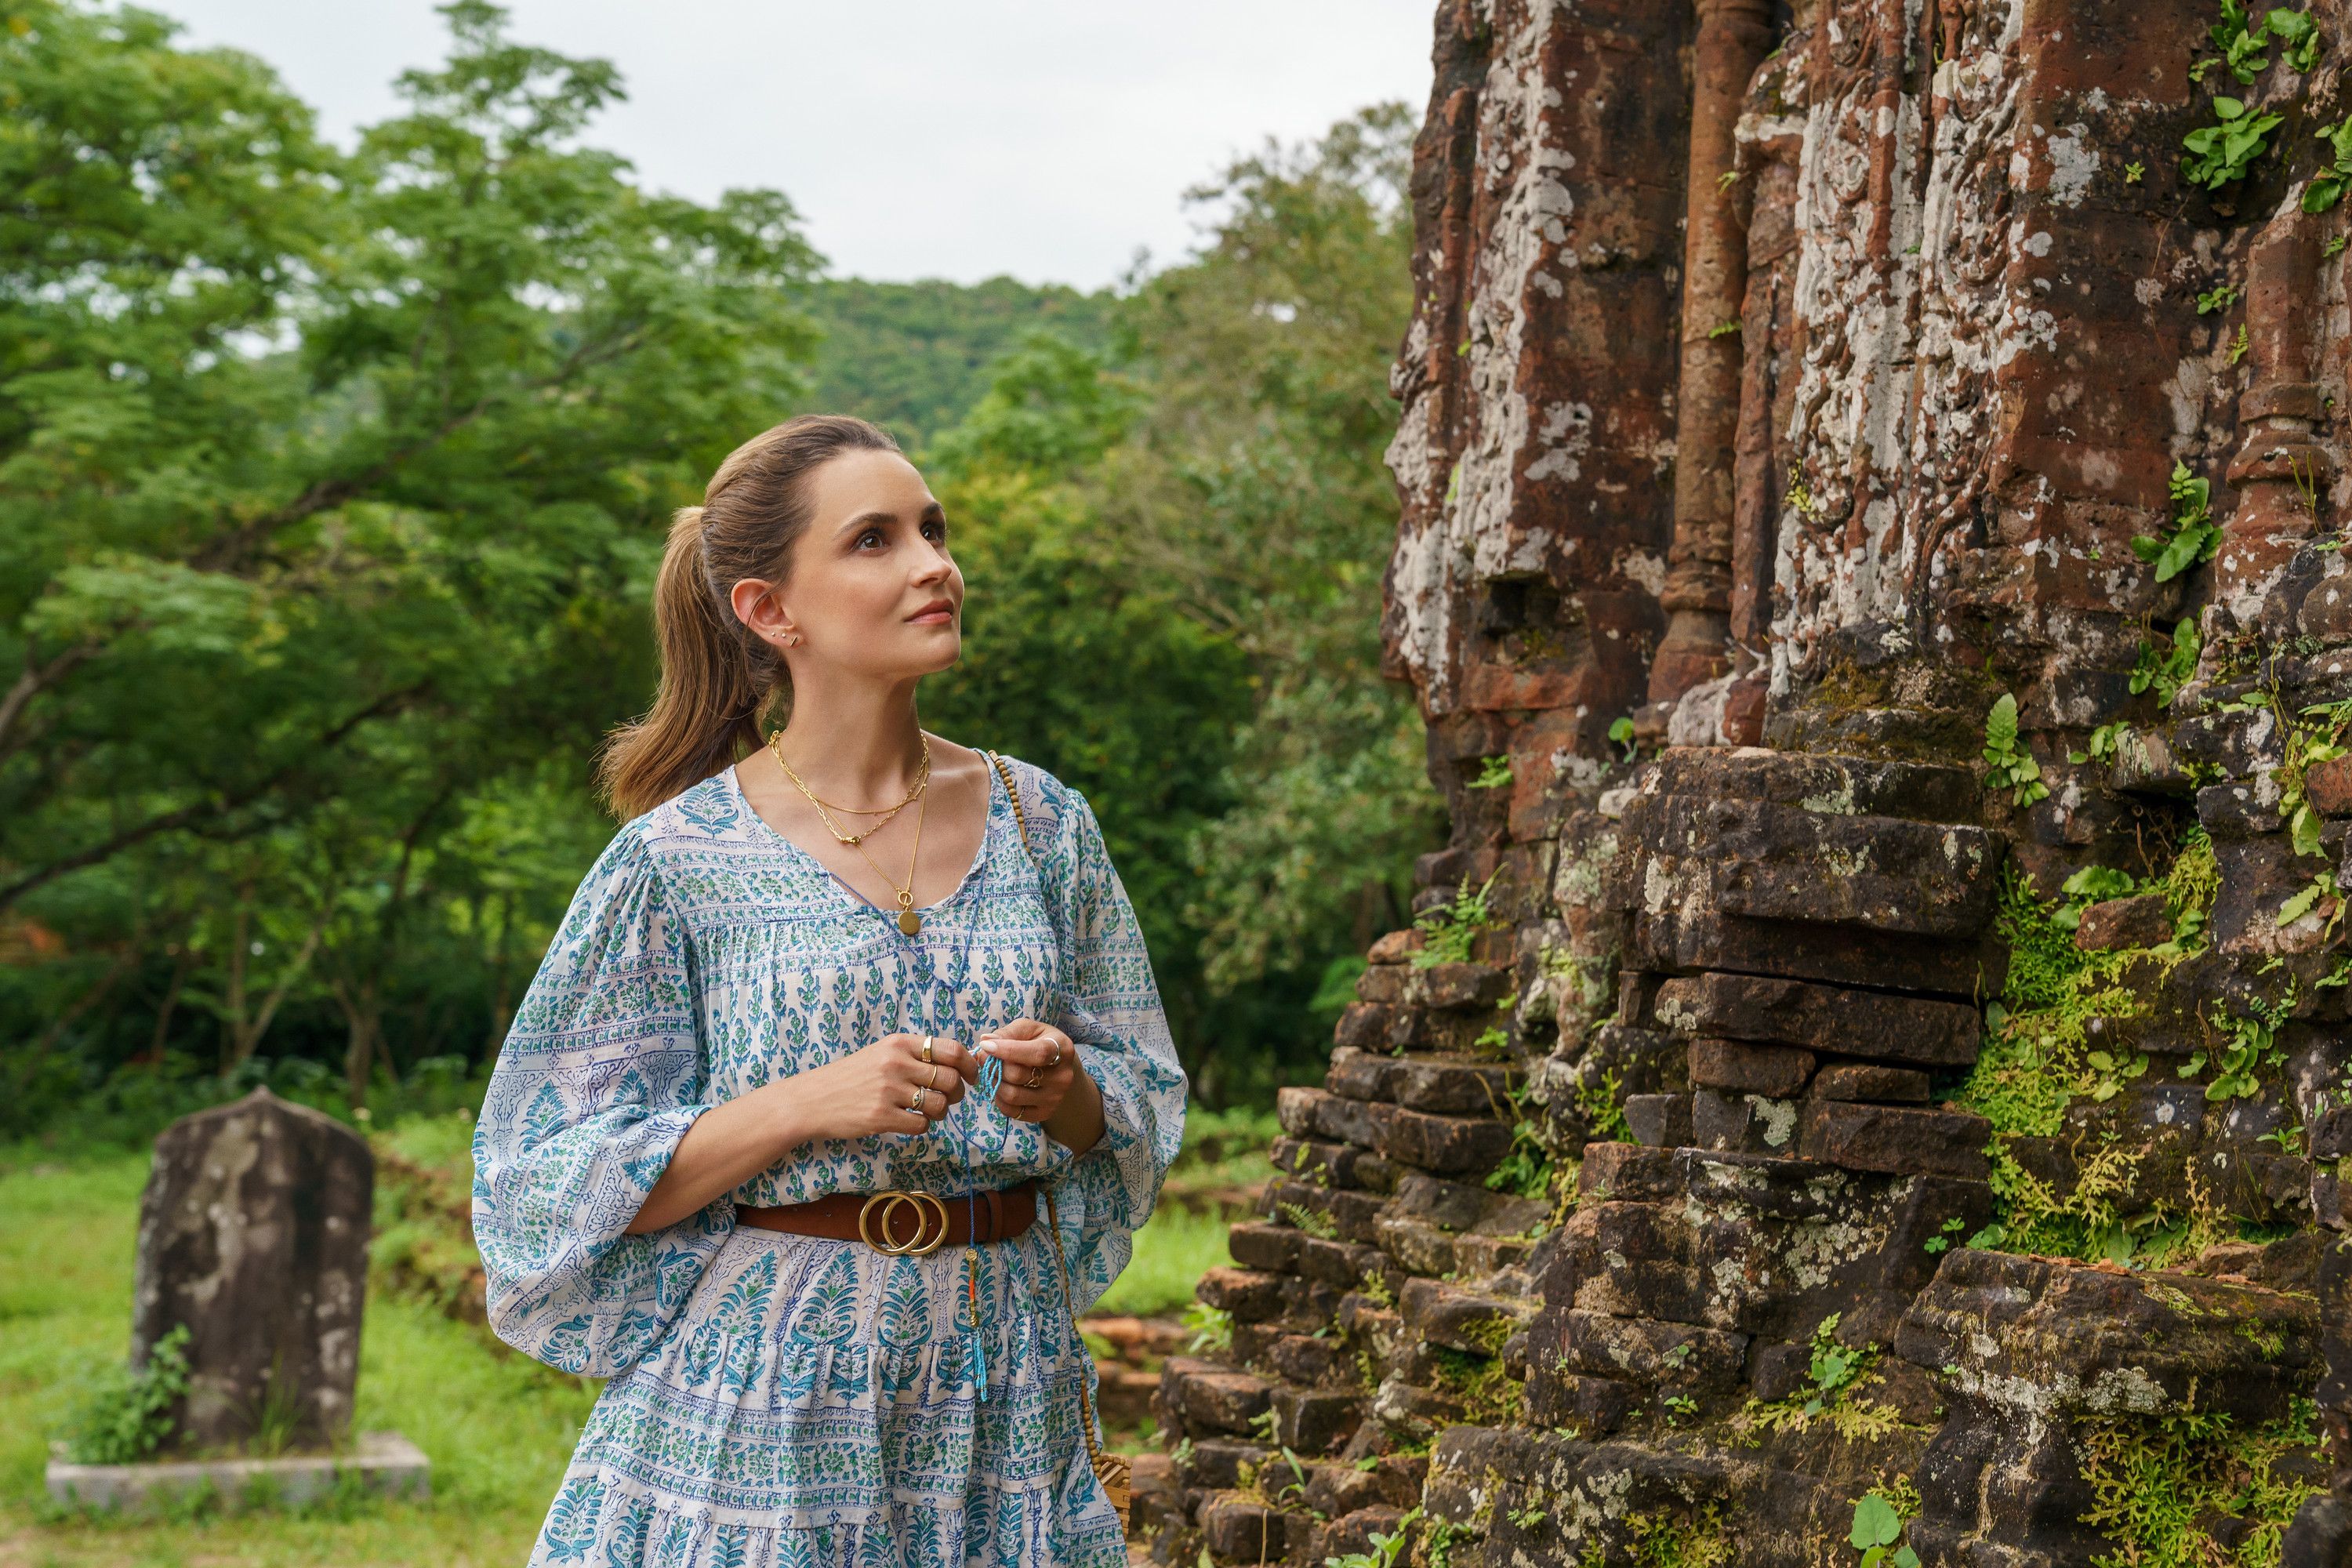 A Tourist's Guide to Love' Features These Vietnam Filming Locations